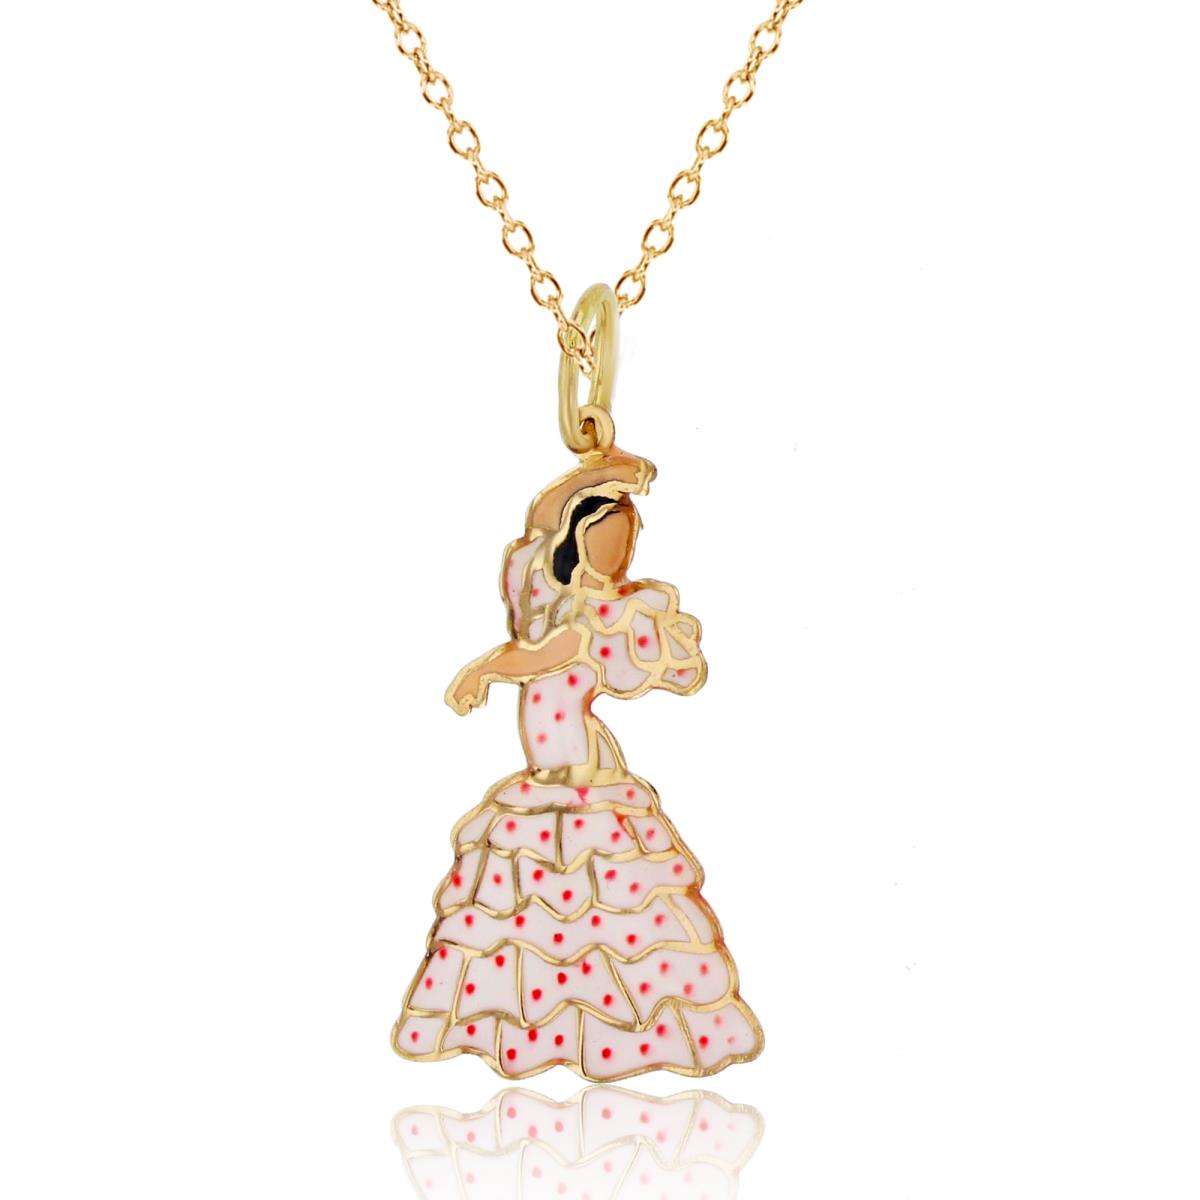 14K Yellow Gold Spanish Dancer 18" 020 Rolo Necklace